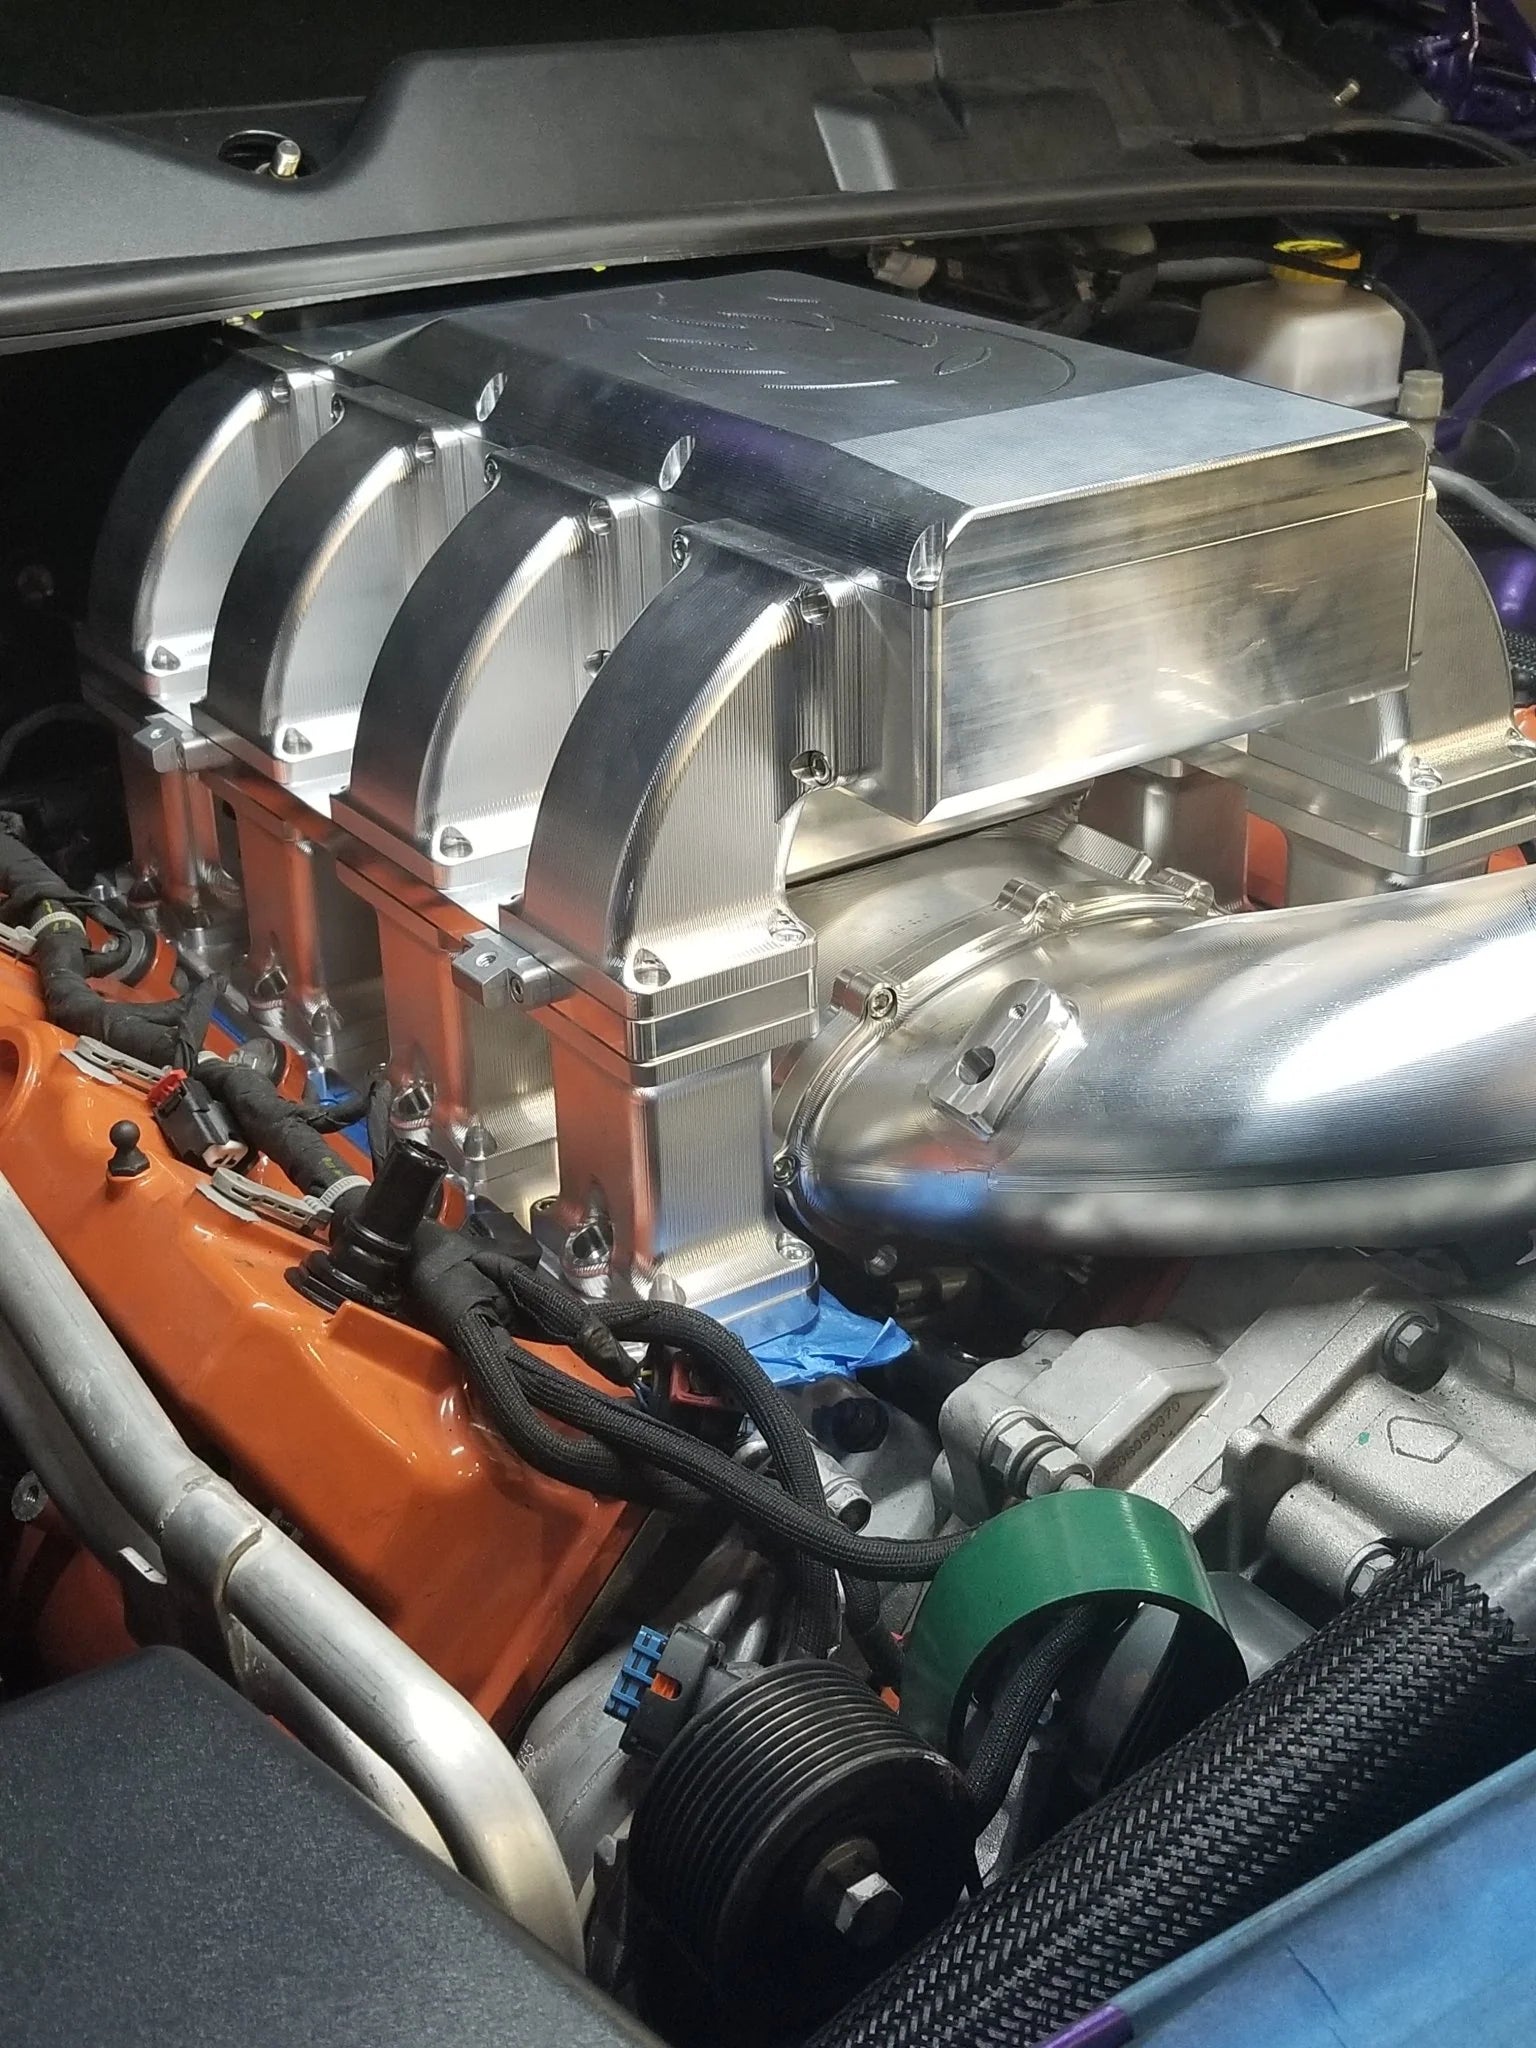 Demon Performance Air-To-Water Intake Manifold for Turbo Applications